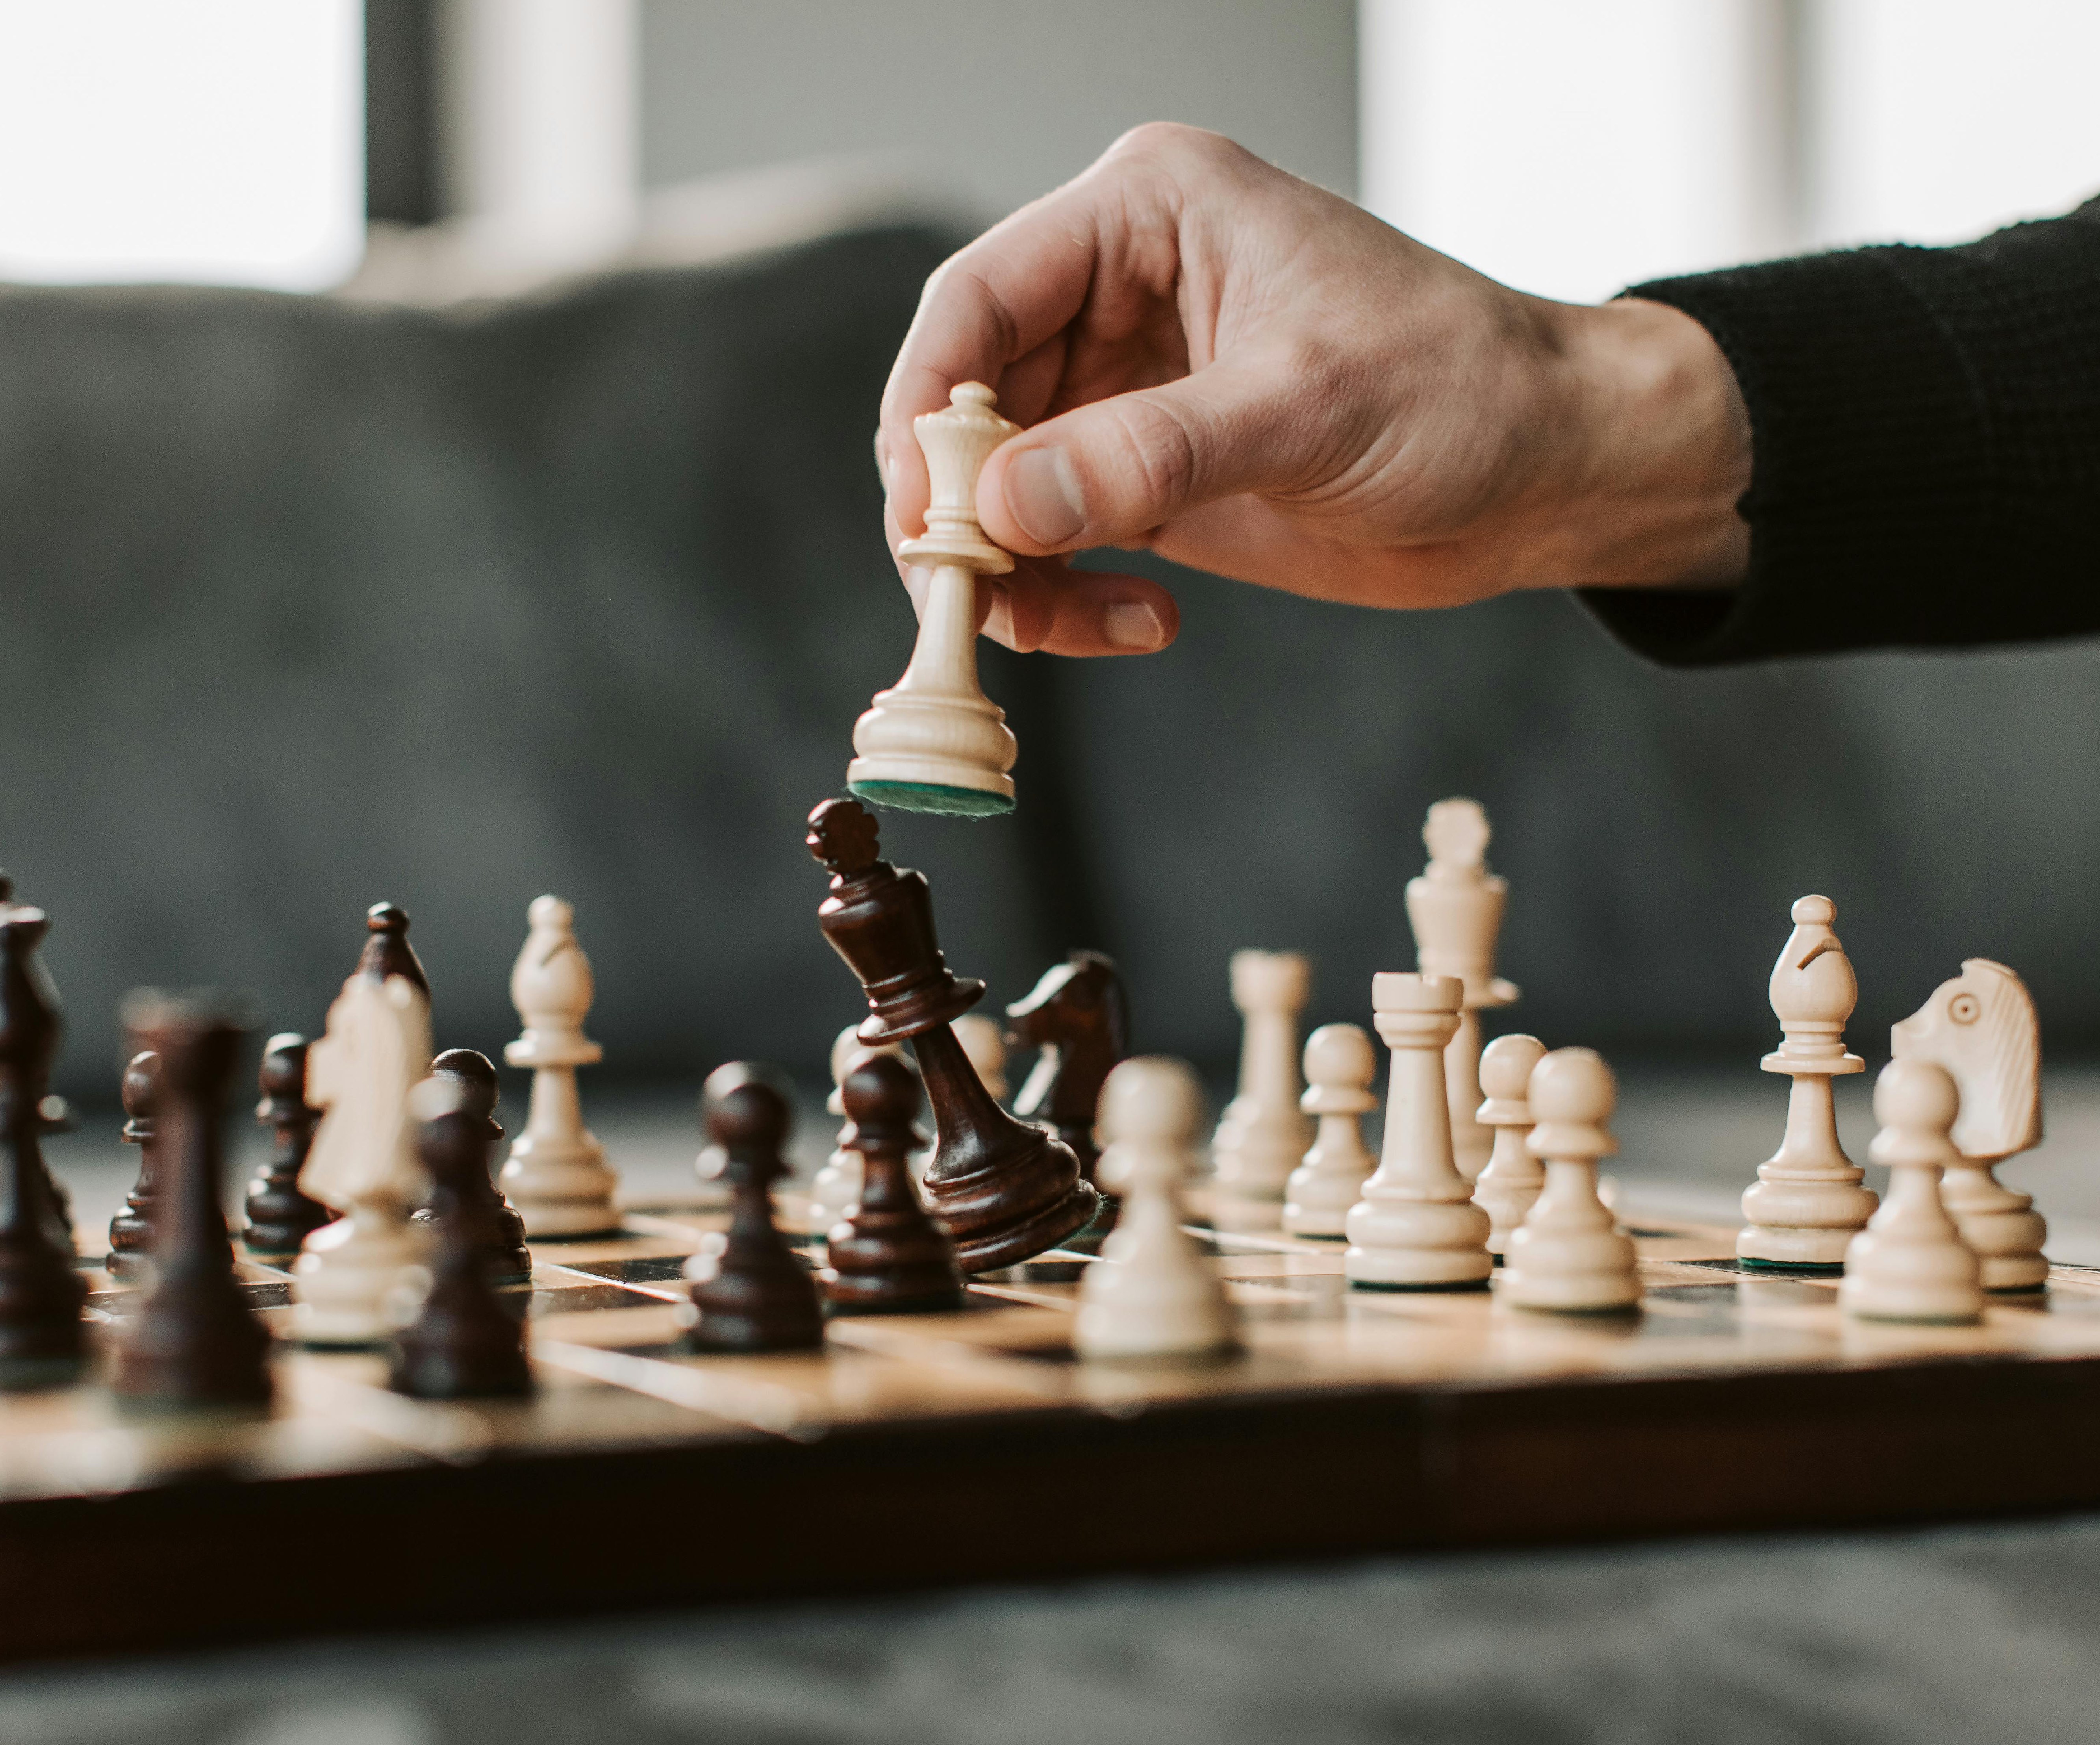 Whether you’re a chess master or a novice, come along to Miranda Library on the fourth Wednesday of every month to play a game with like-minded people.